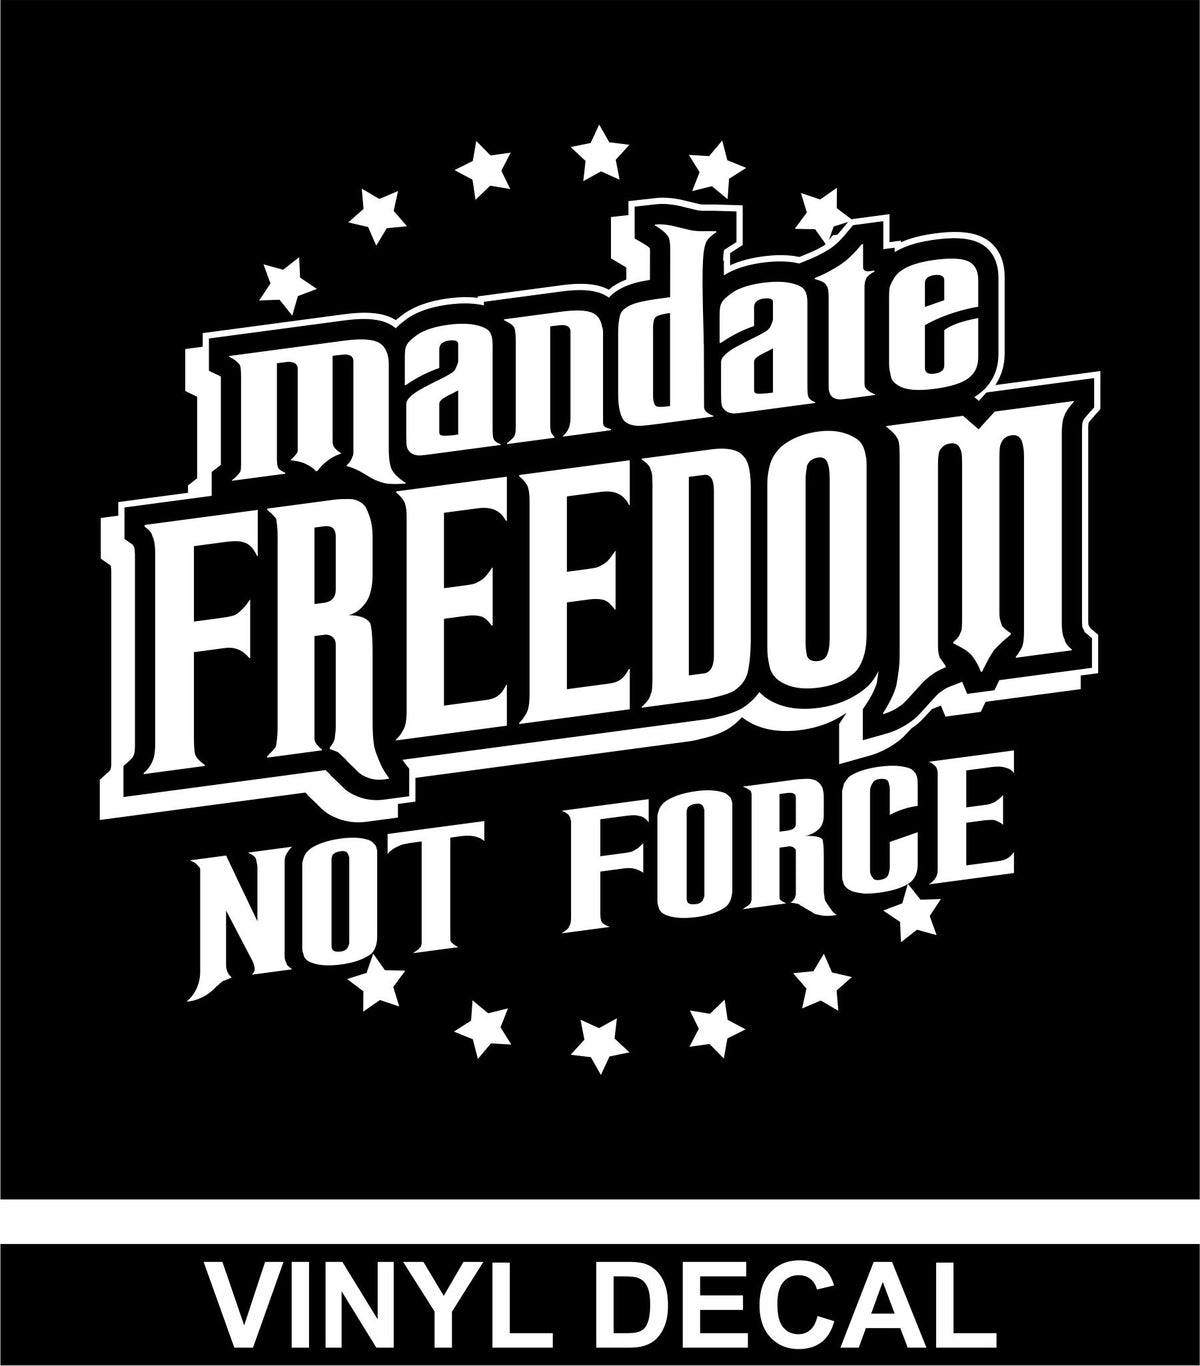 Mandate Freedom Not Force - Vinyl Decal - Free Shipping